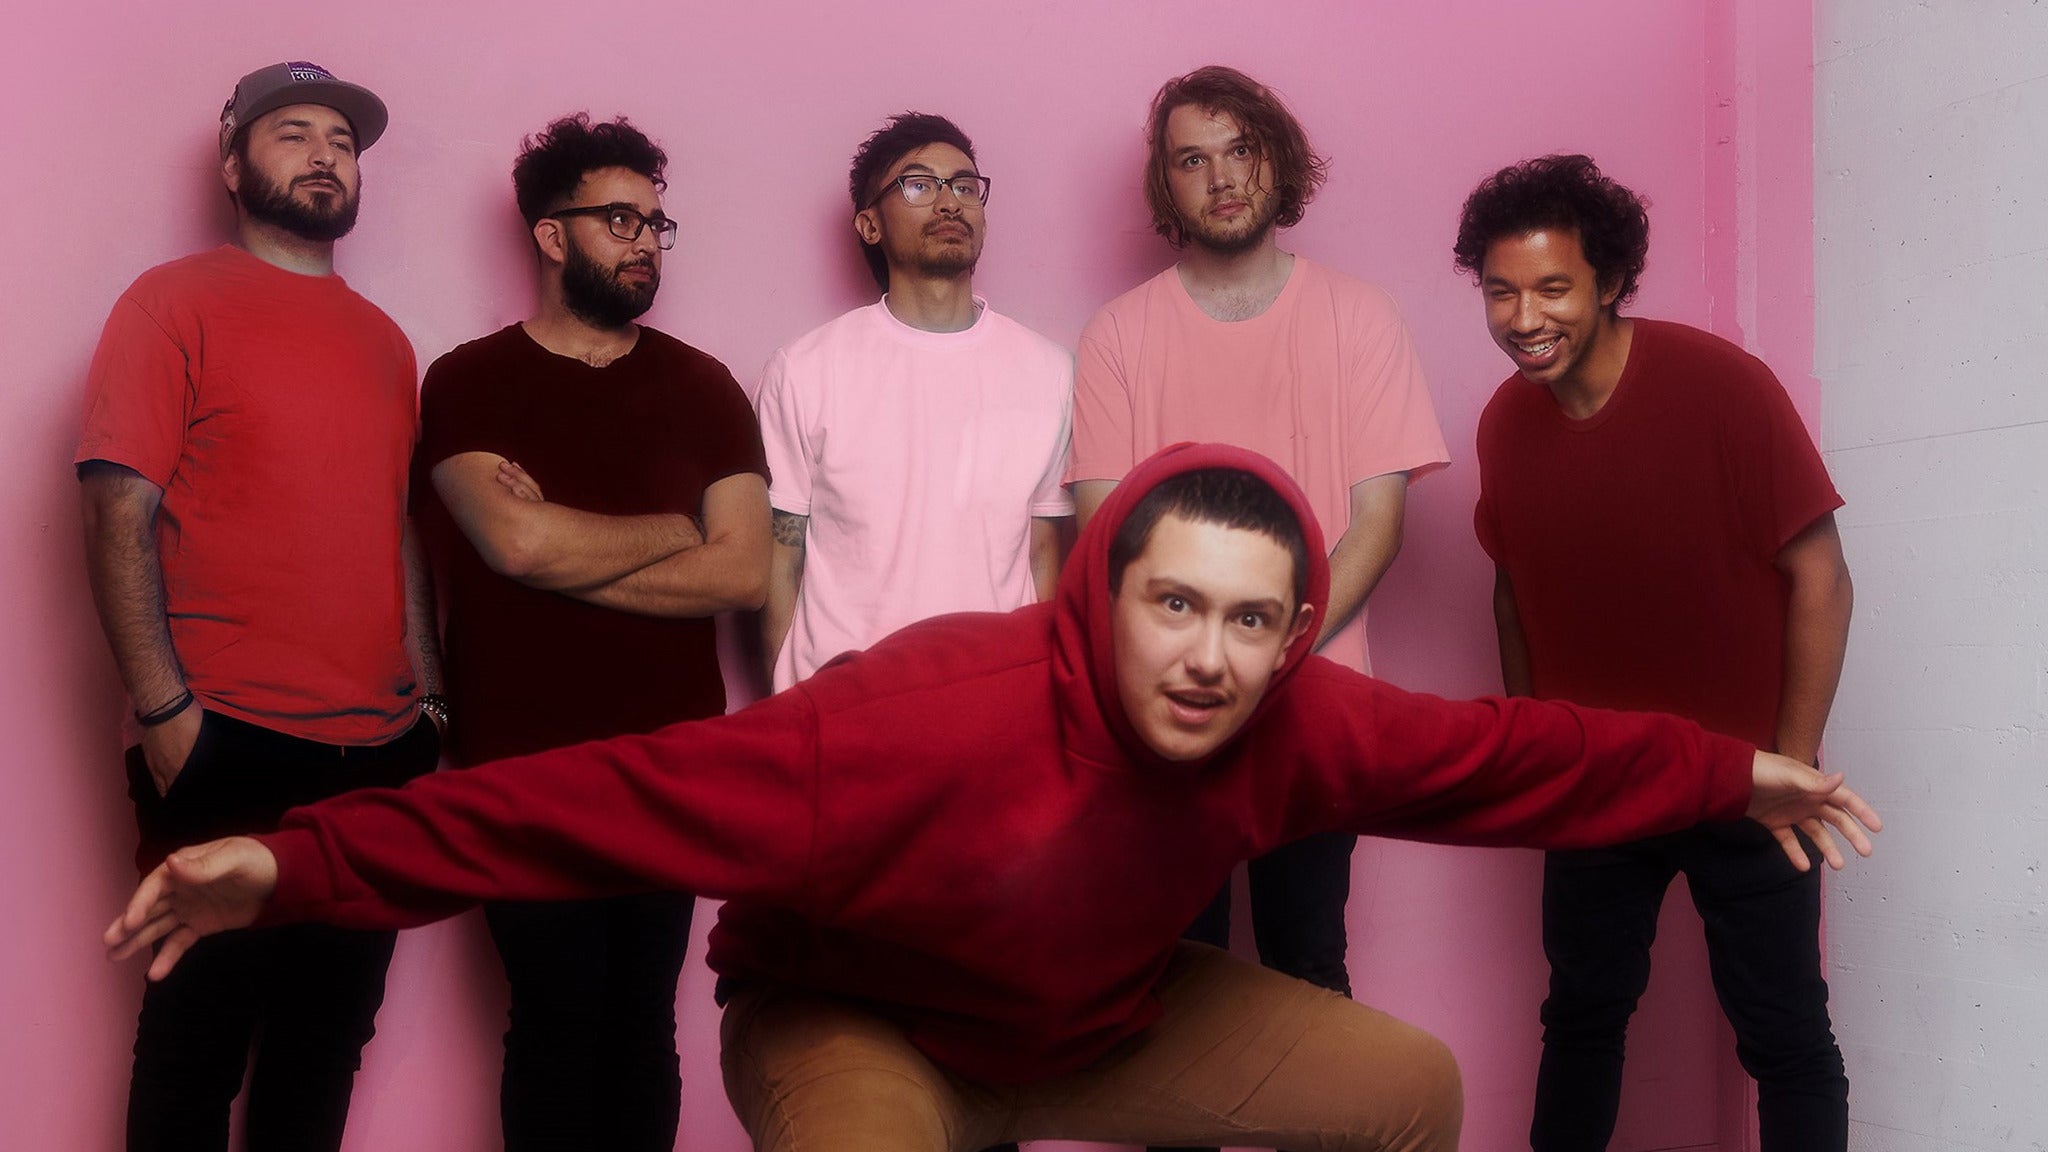 The Fall Tour of Hobo Johnson & the Lovemakers in San Antonio promo photo for Live Nation presale offer code